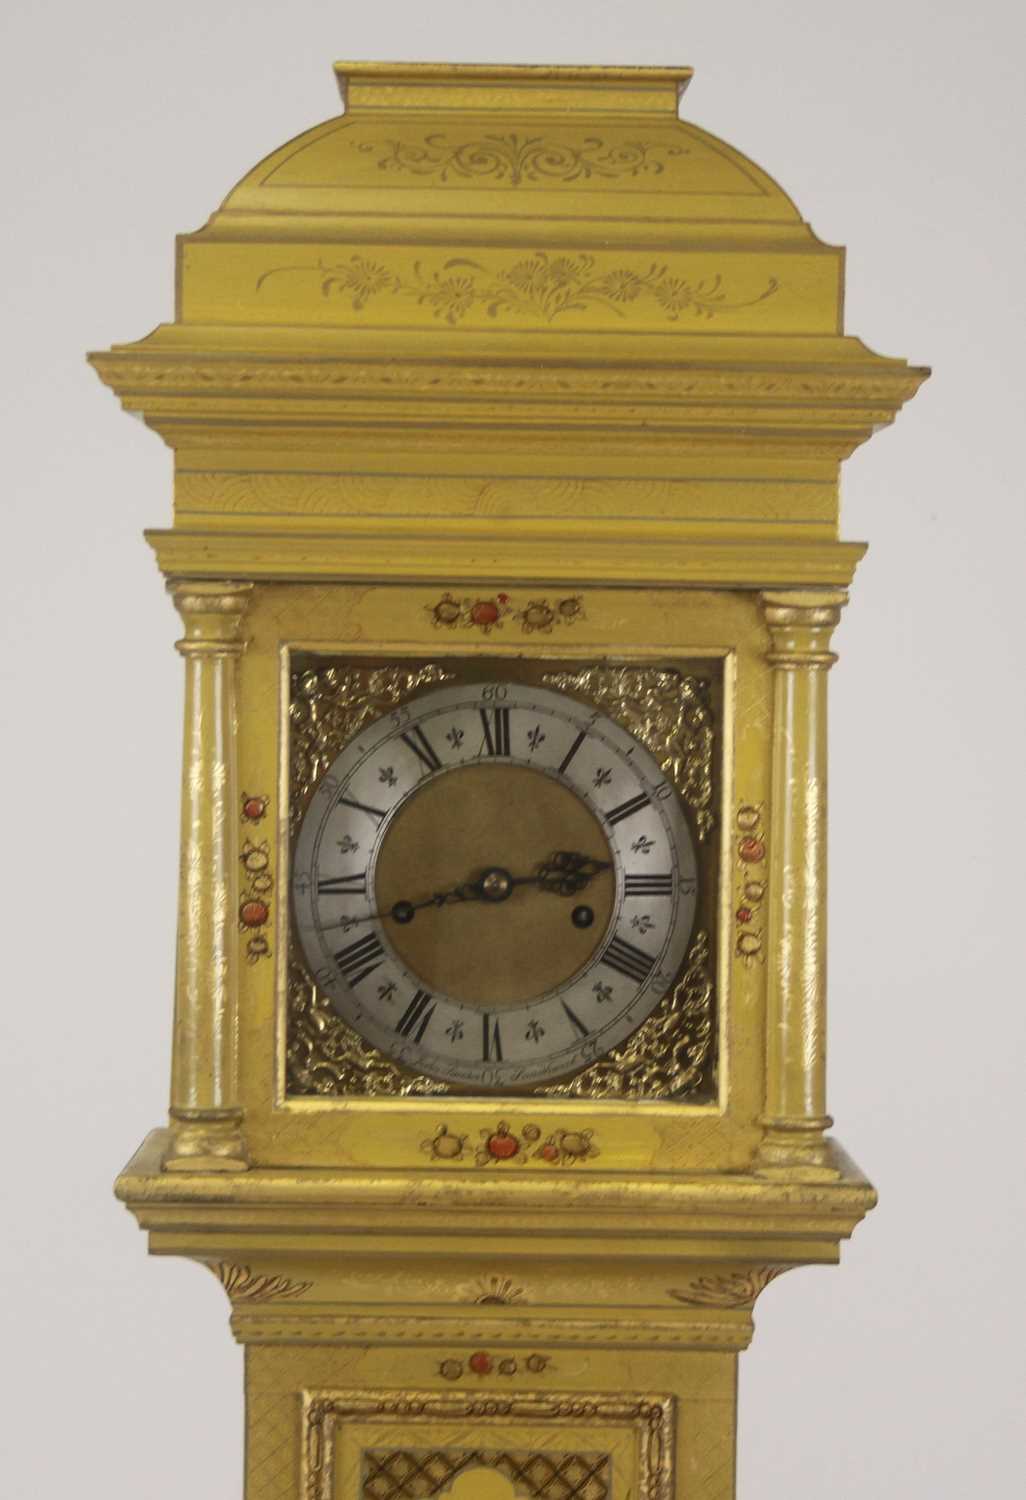 John Sander of Sandhurst - a chinoiserie yellow lacquered longcase clock in the early 18th century - Image 2 of 5